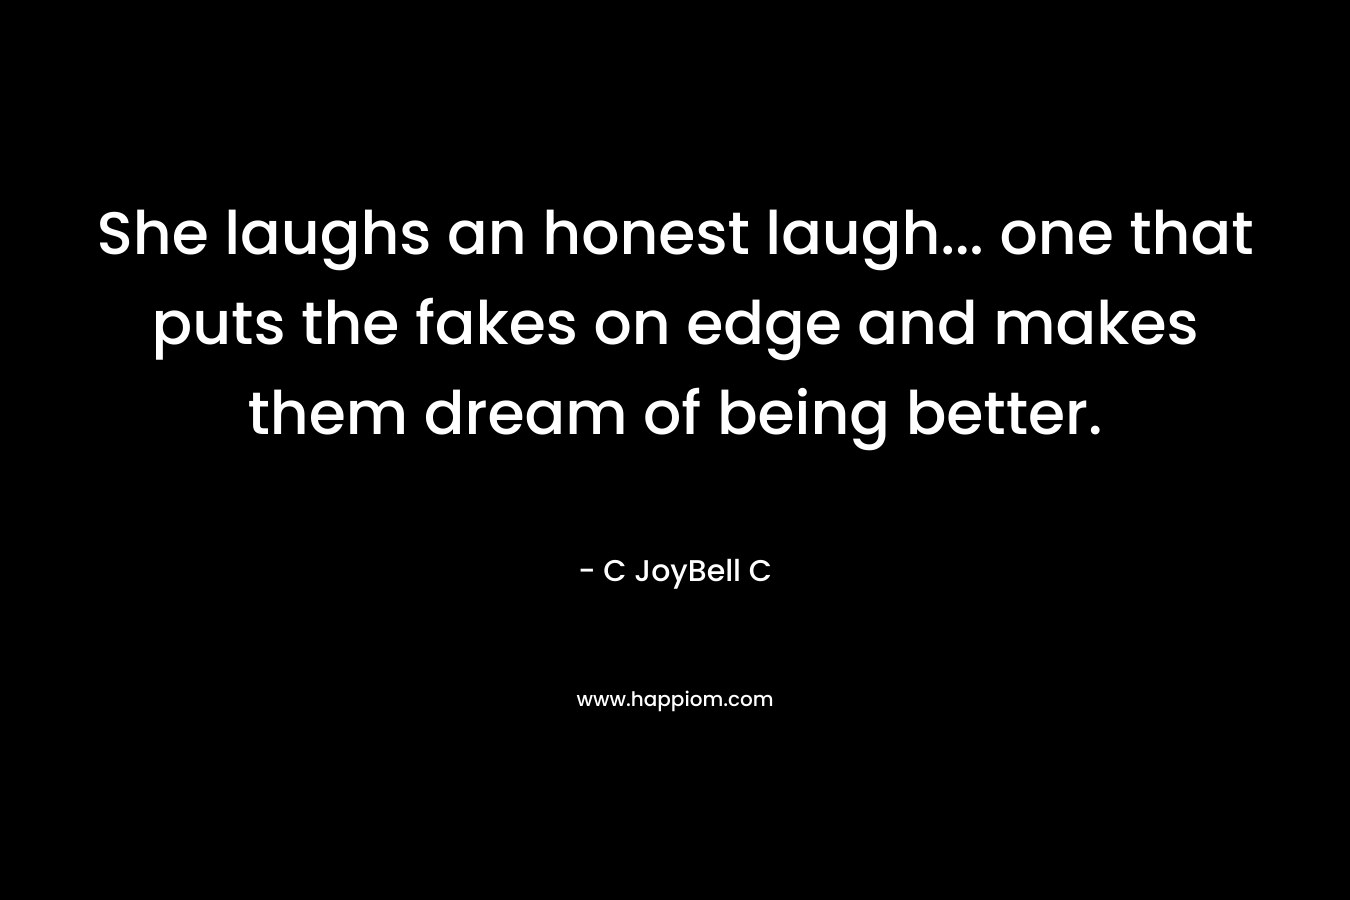 She laughs an honest laugh… one that puts the fakes on edge and makes them dream of being better. – C JoyBell C